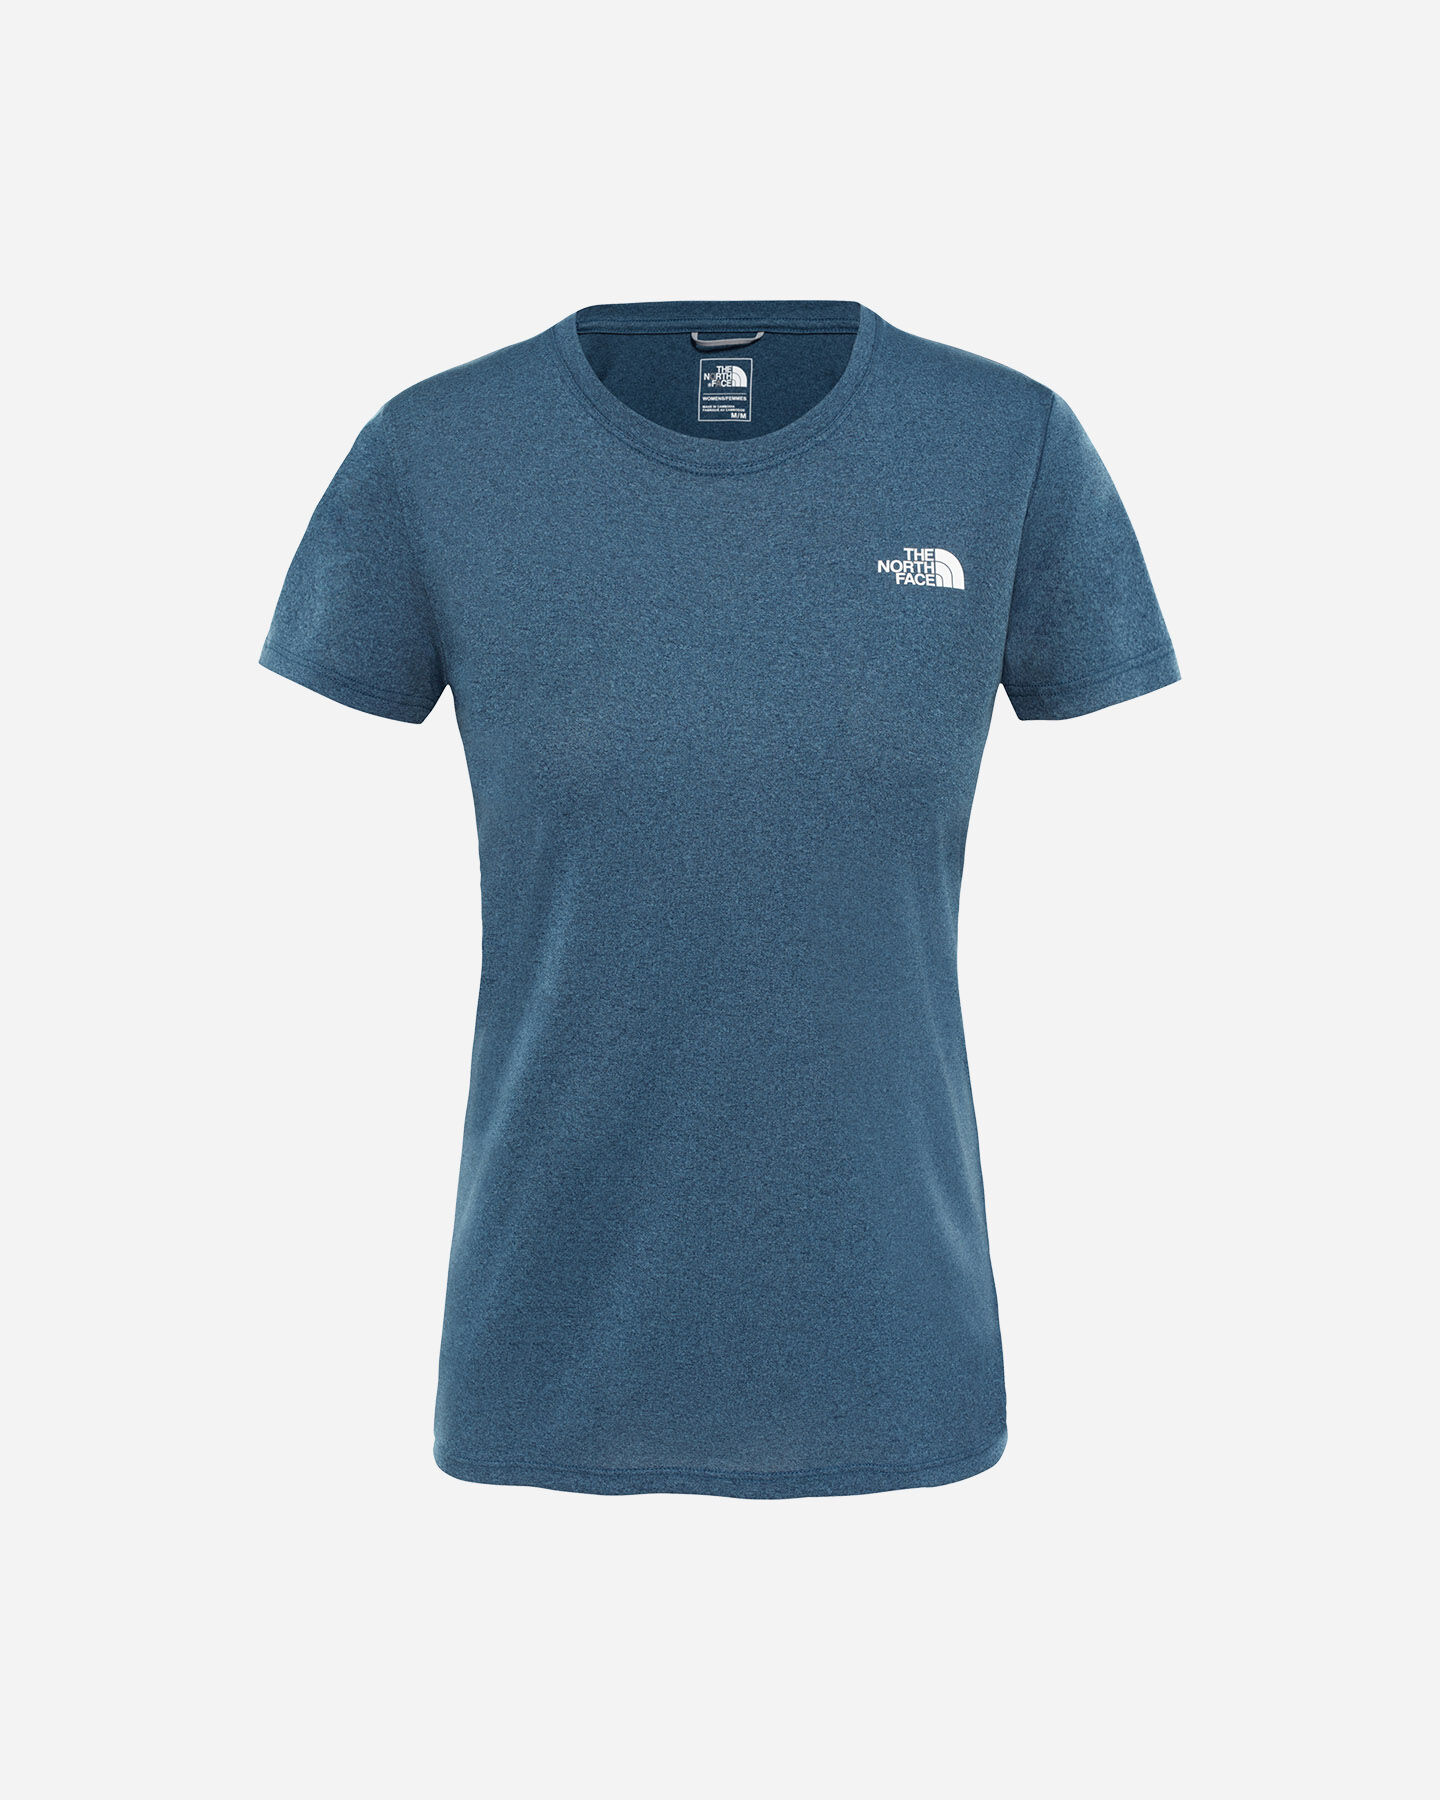  T-Shirt THE NORTH FACE REAXION AMP W S5535556 scatto 5